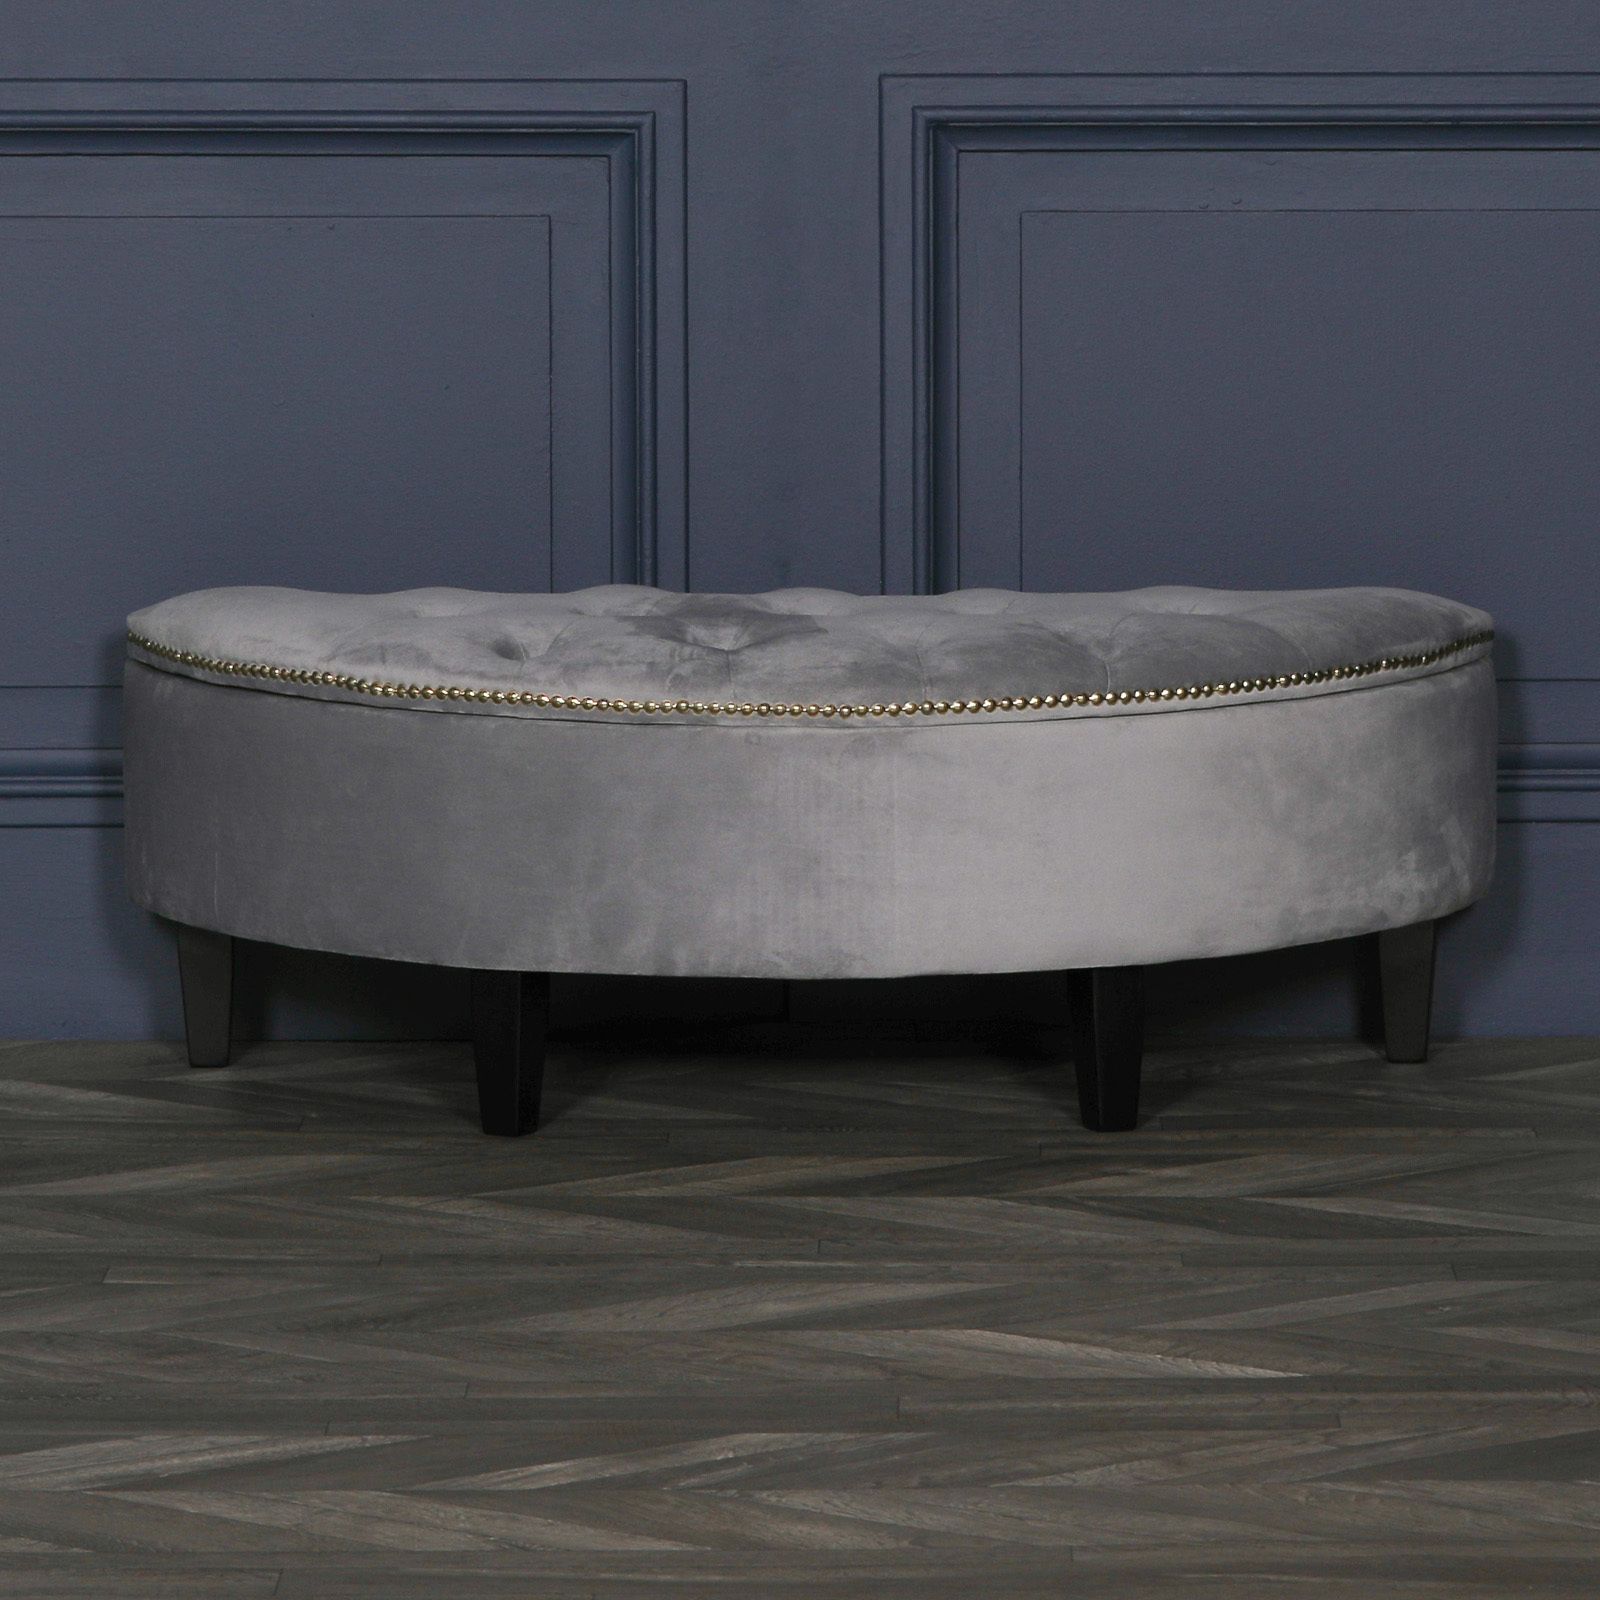 Adelis Contemporary Grey Velvet Buttoned Storage Pouf Ottoman Furniture Pertaining To Gray Wool Pouf Ottomans (View 11 of 20)